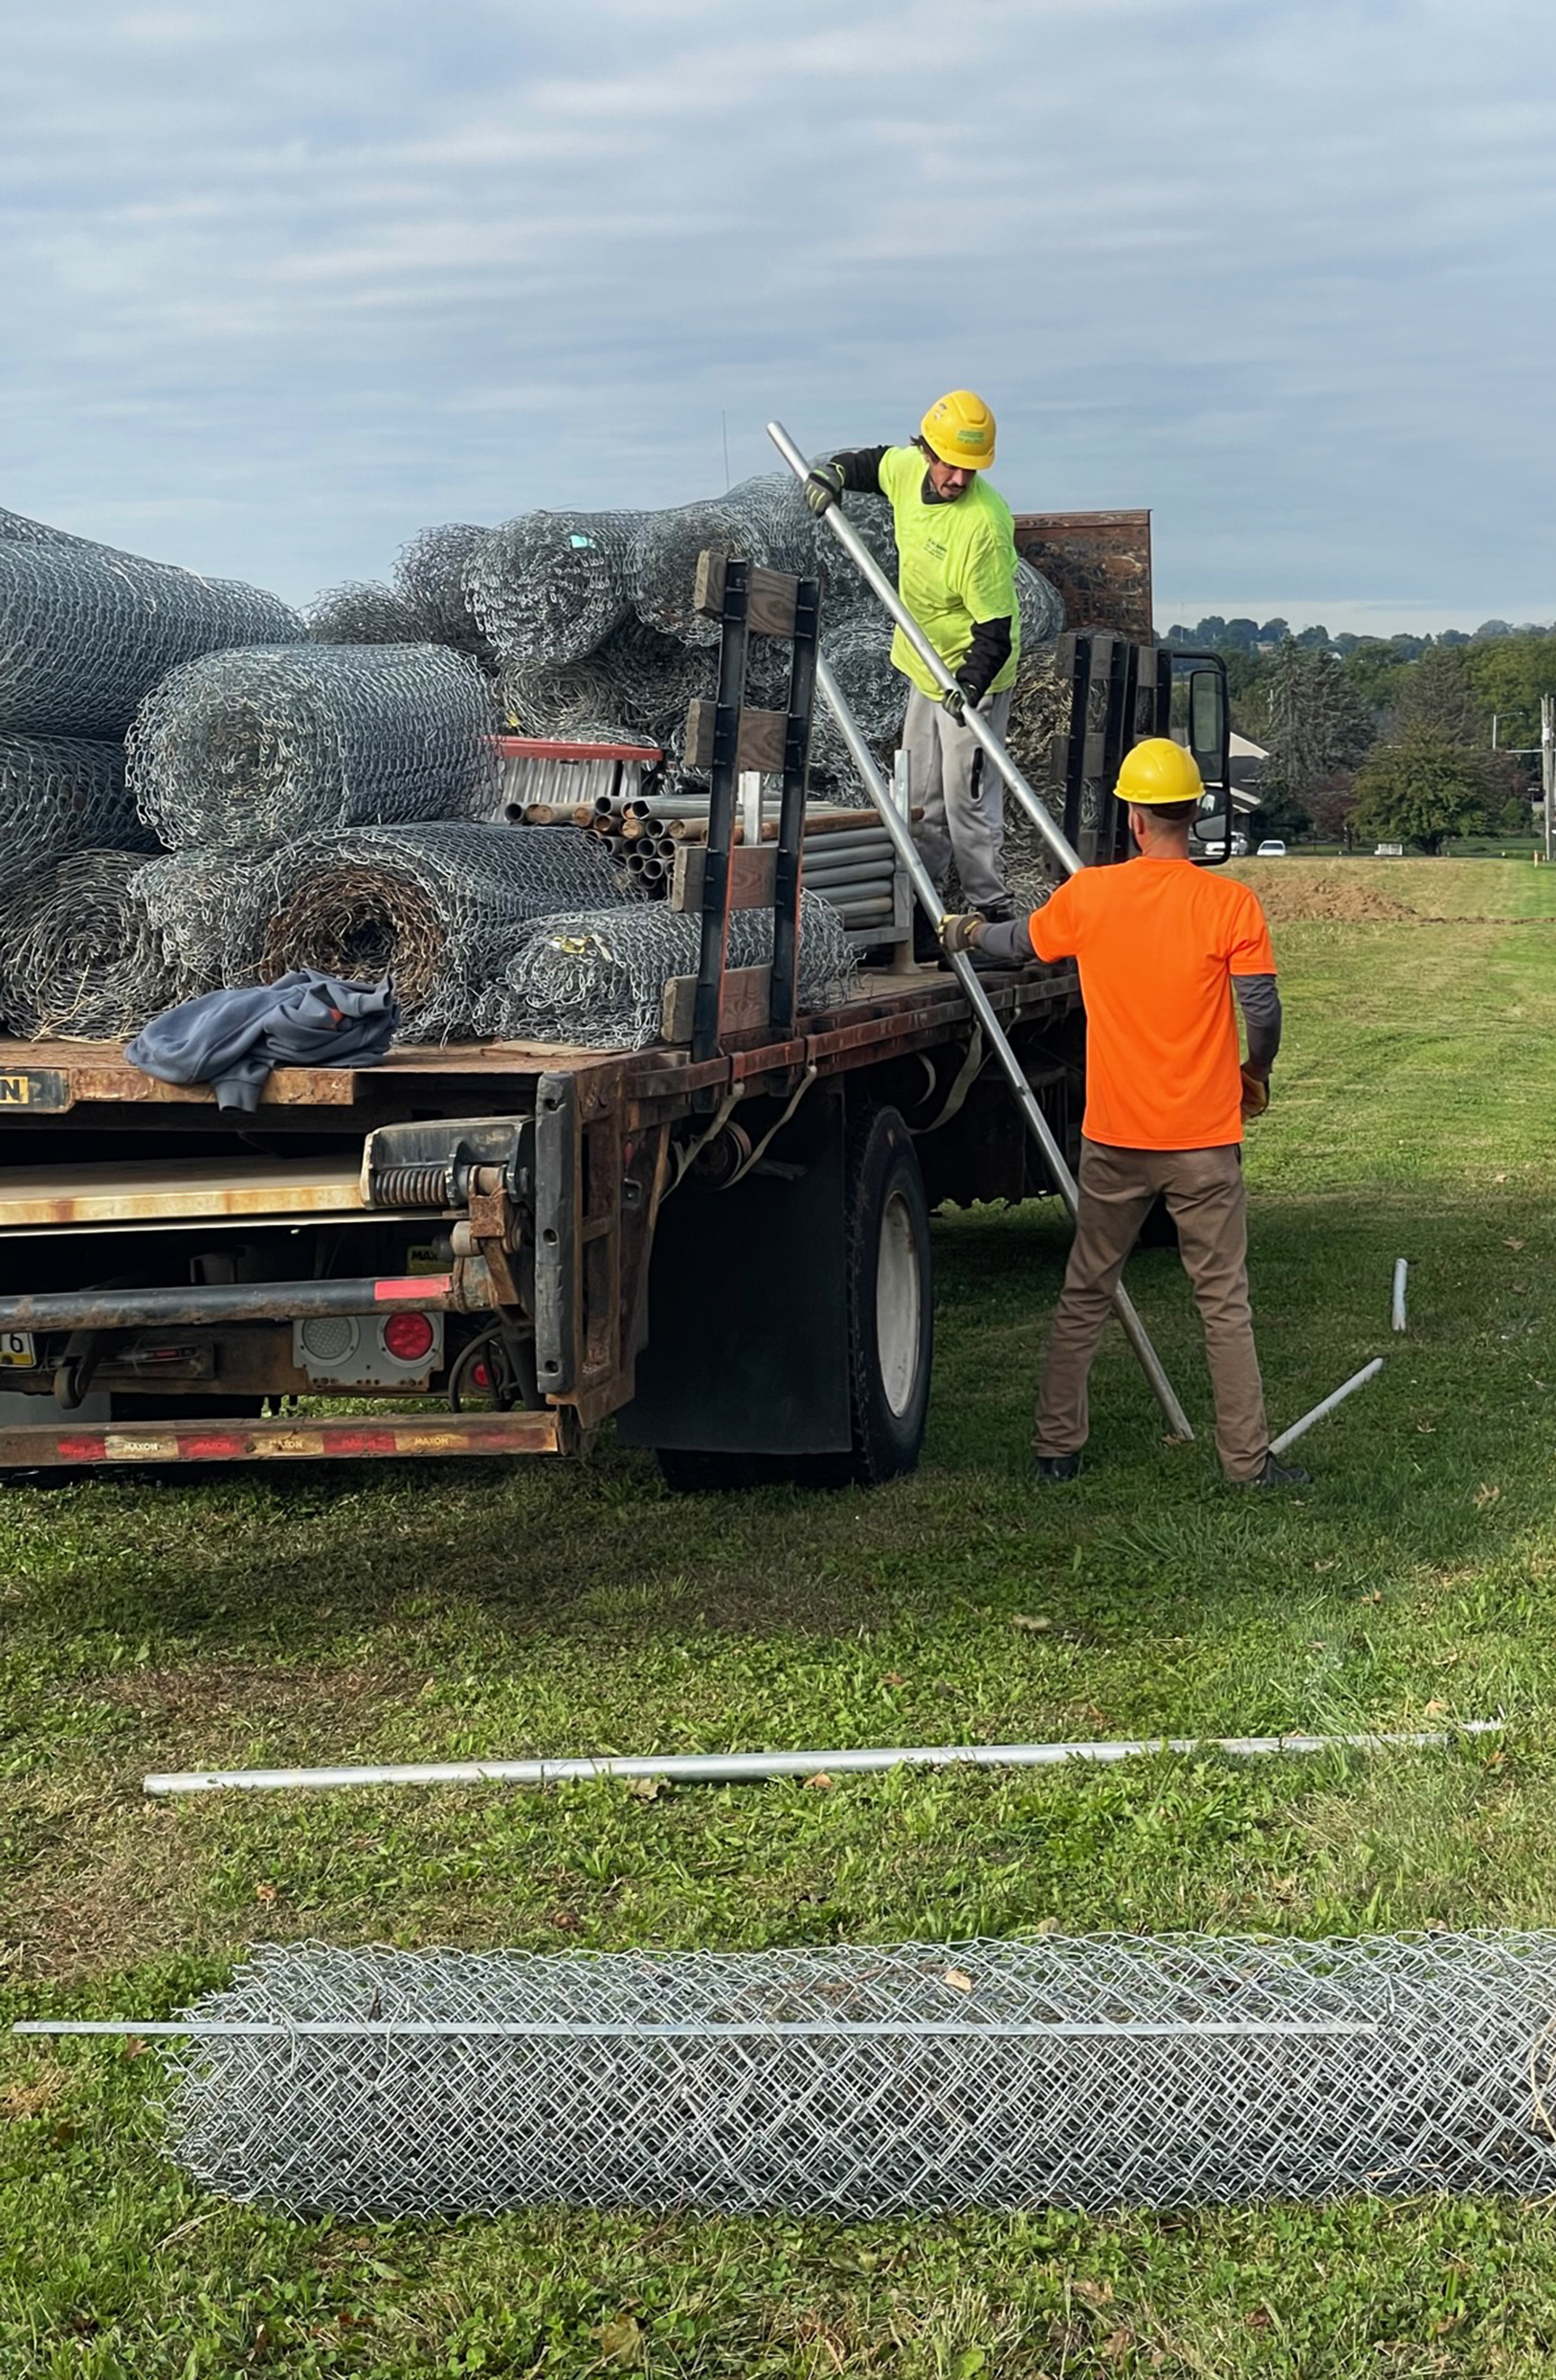 Two workers on Truck unloading rolls of fencing for Driven Fence